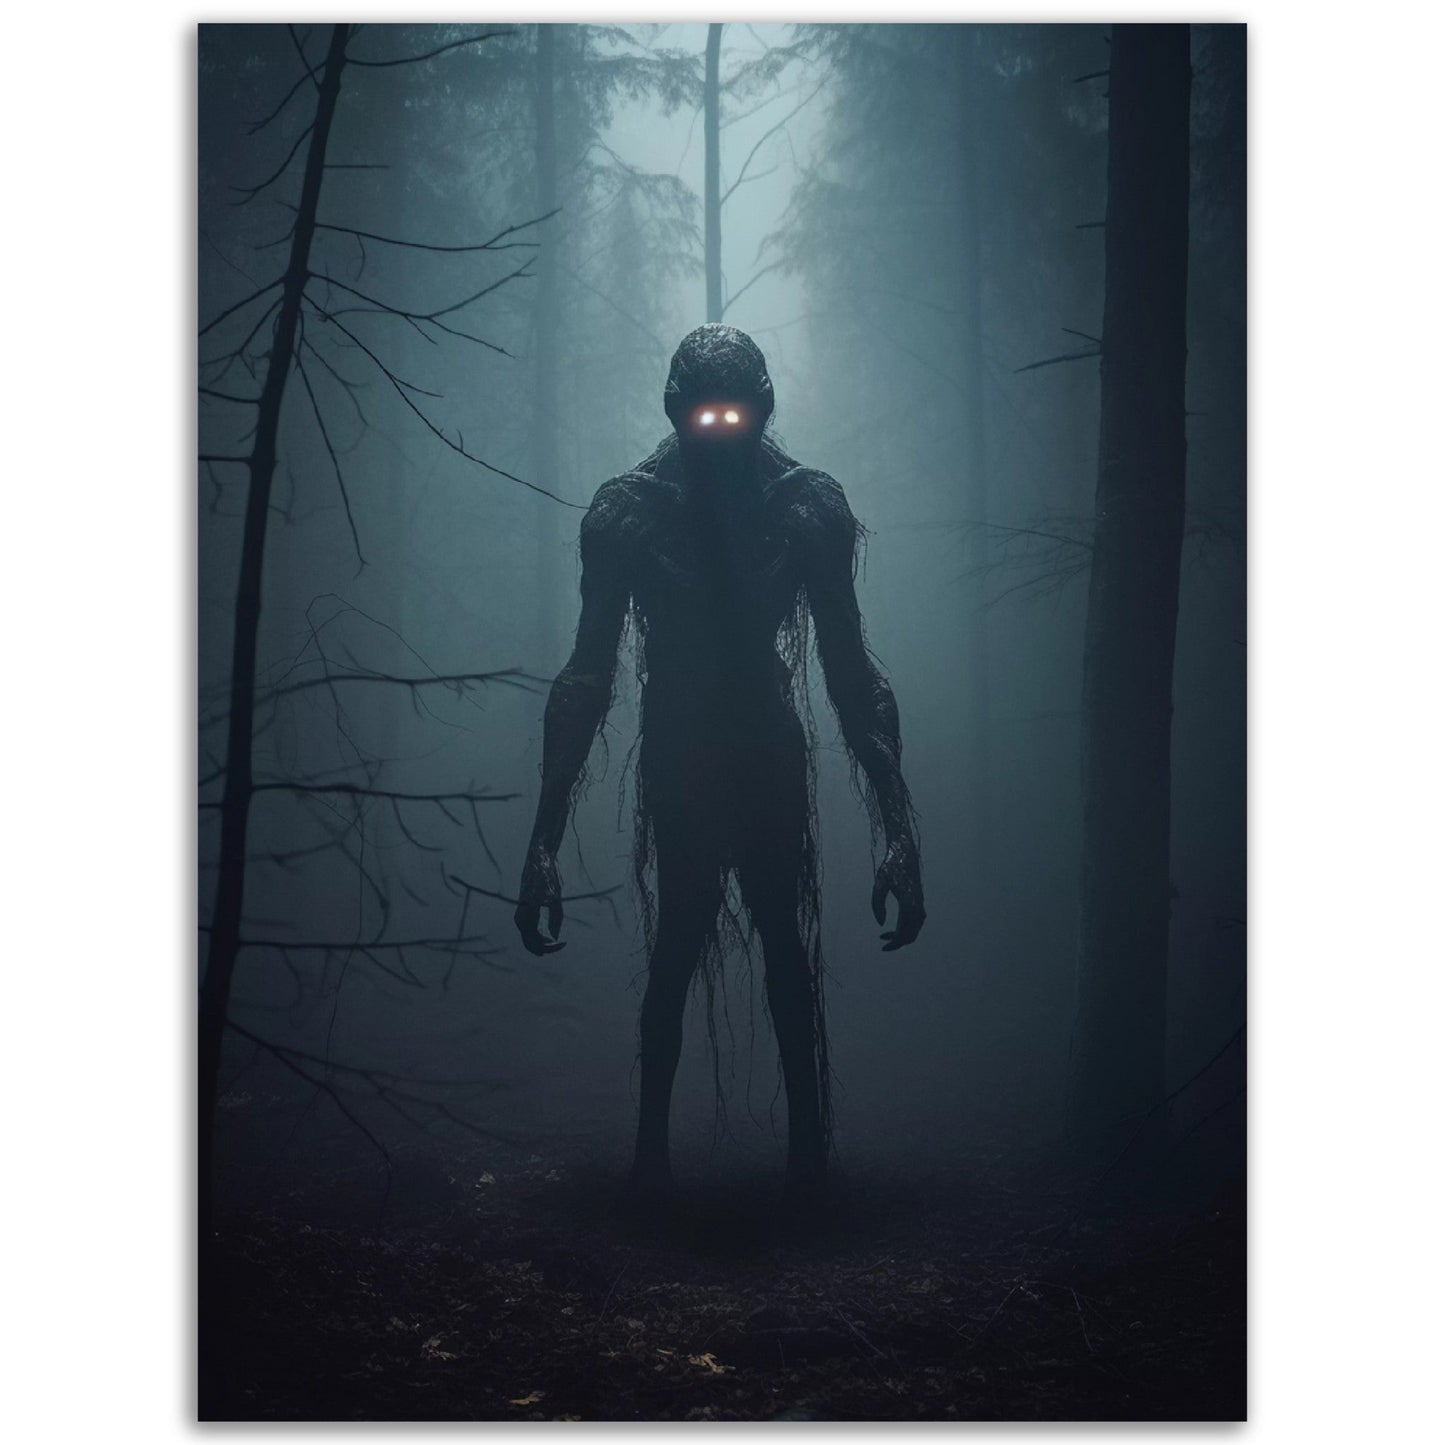 A stunning colored Though The Forest wall art featuring a mesmerizing creature in the woods. This high-quality poster is the perfect addition to any space.